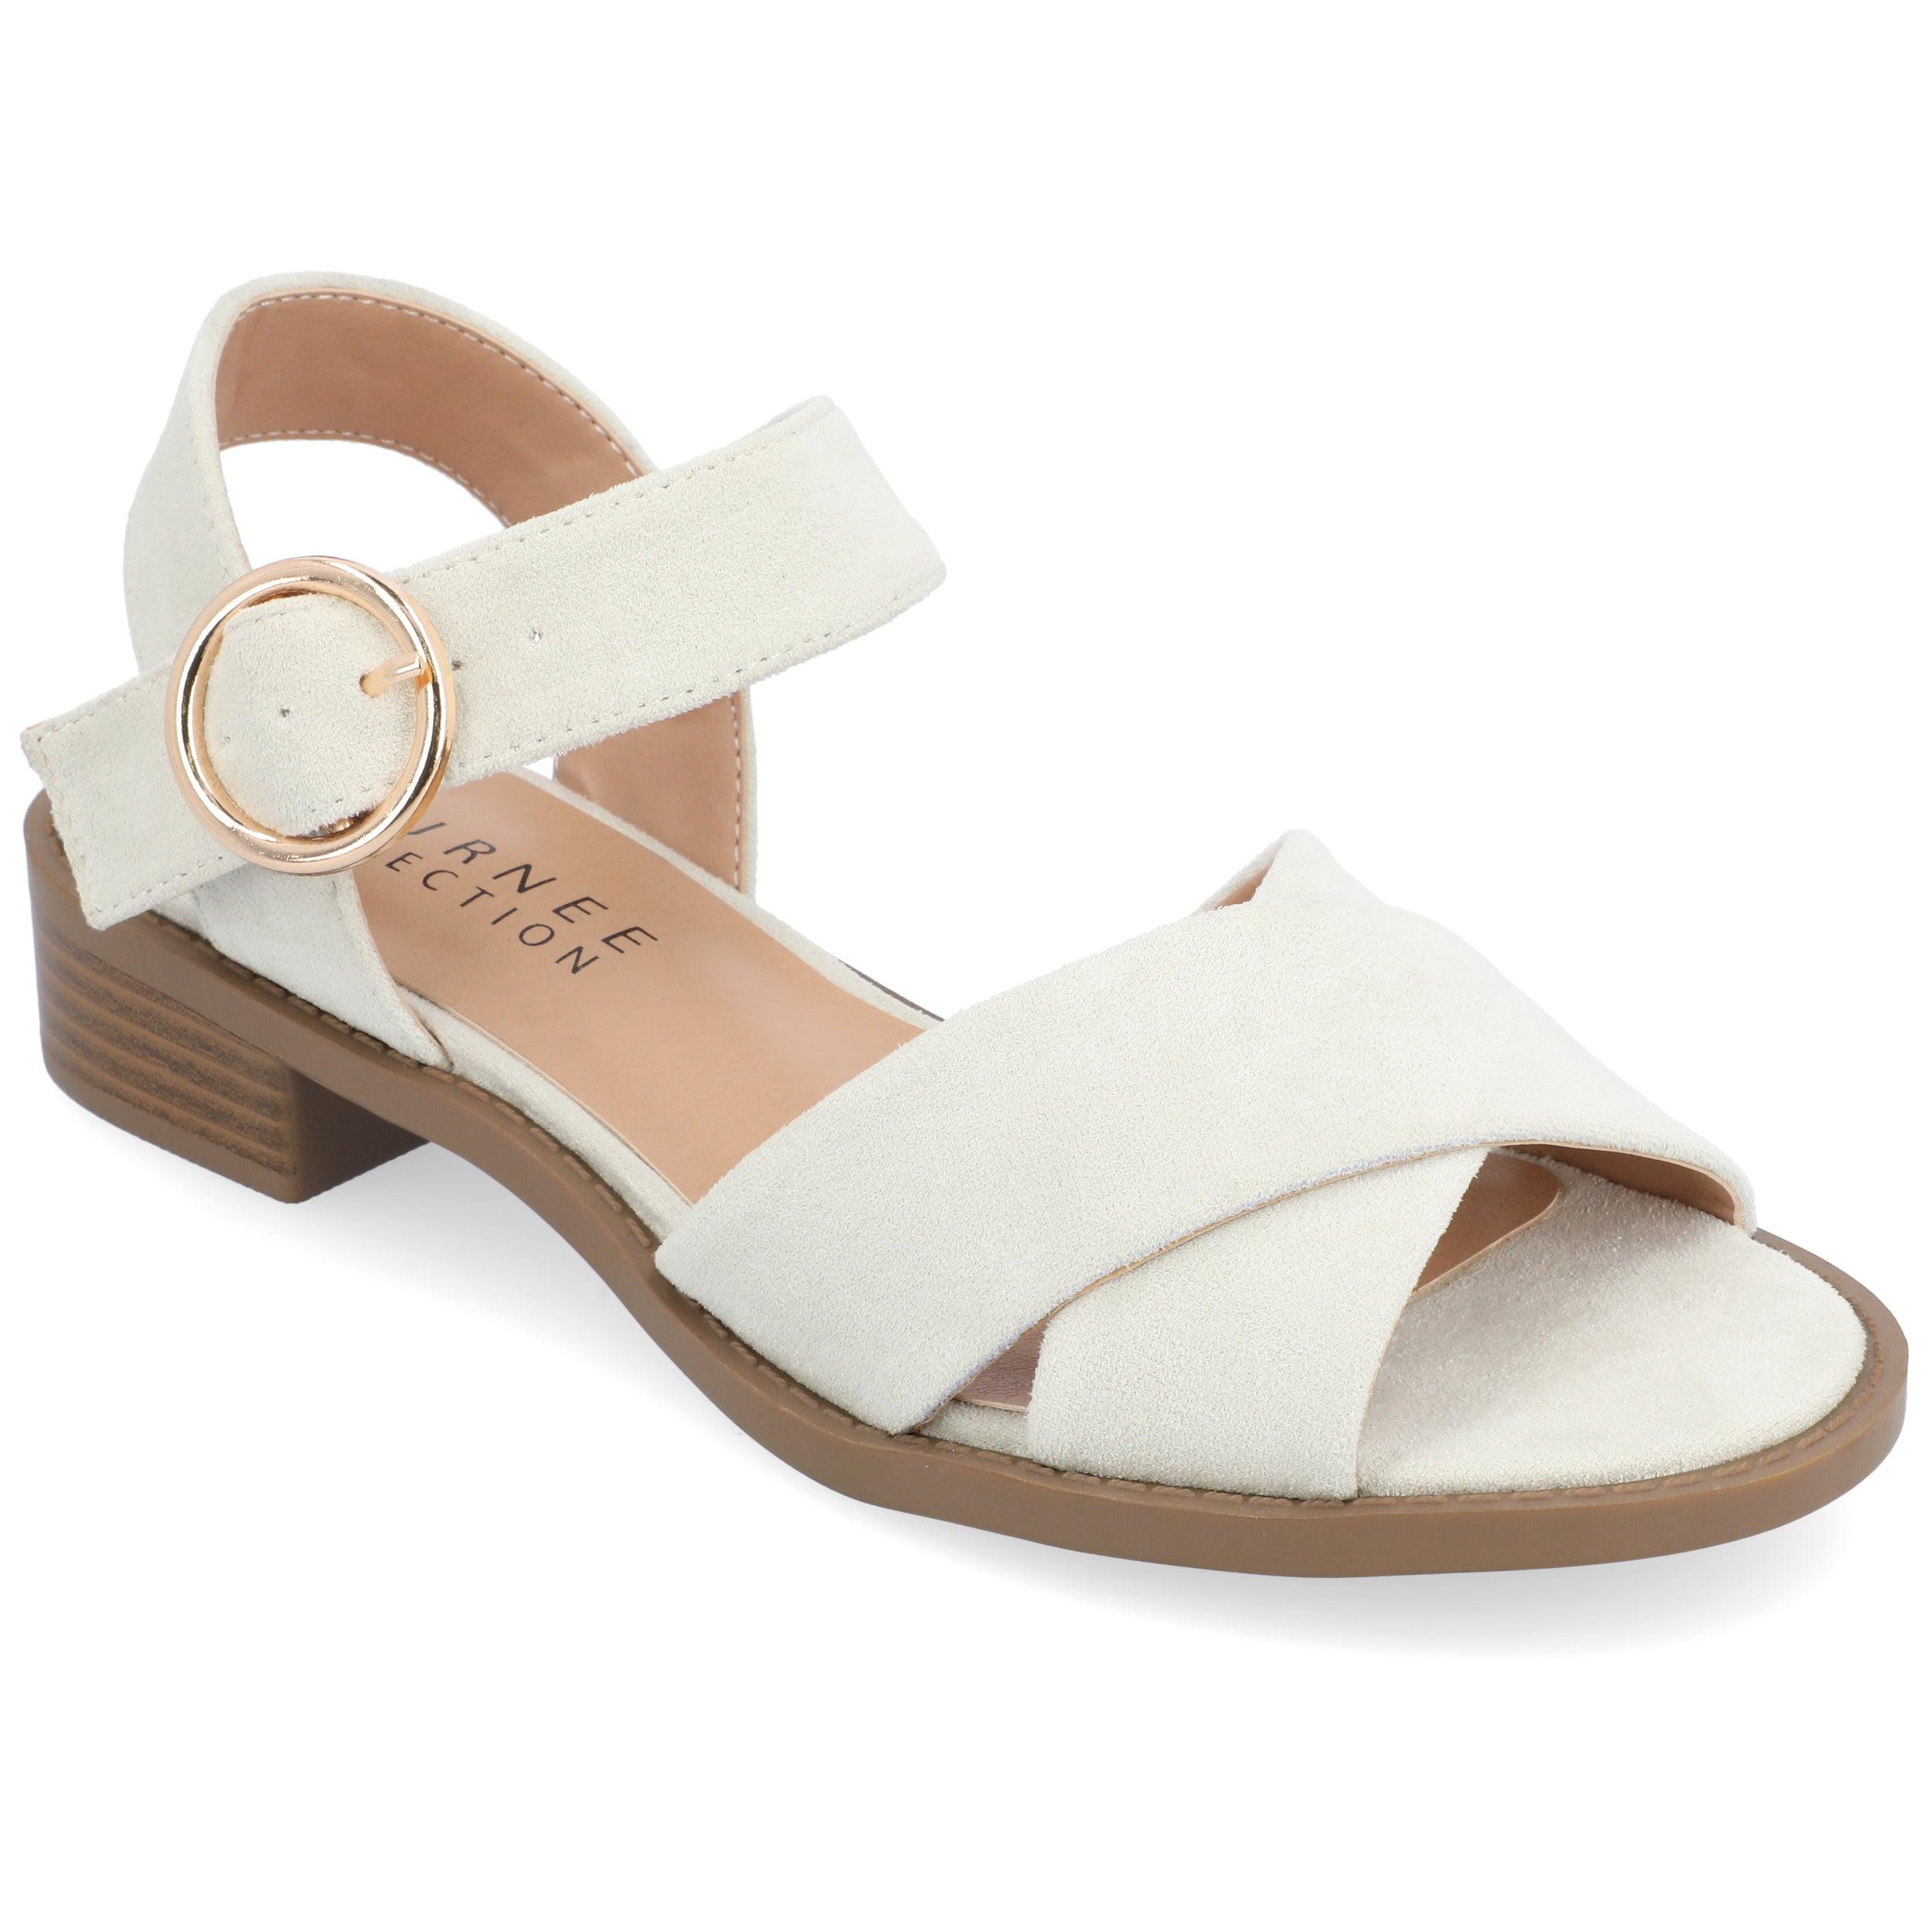 Journee Collection Cressida Sandals in White | Lyst